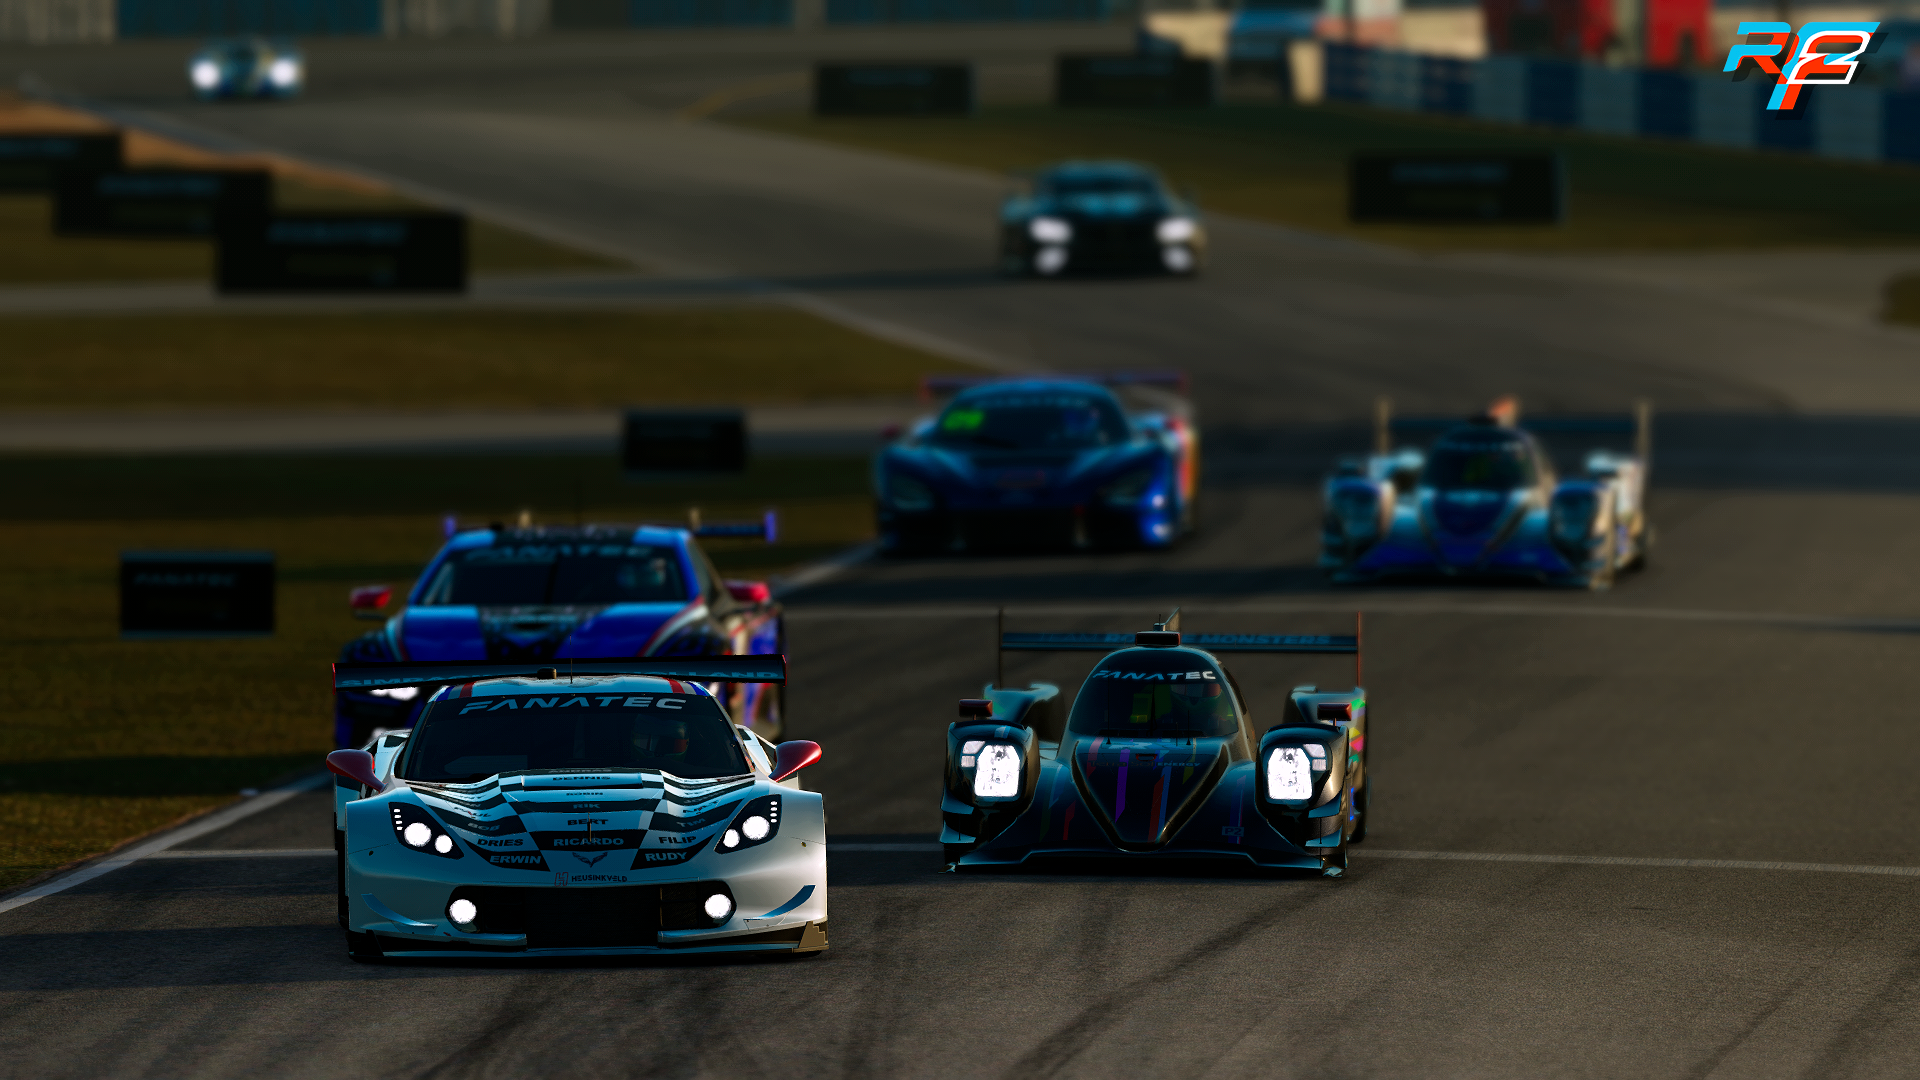 More information about "rFactor 2: Roadmap Update March 2019"